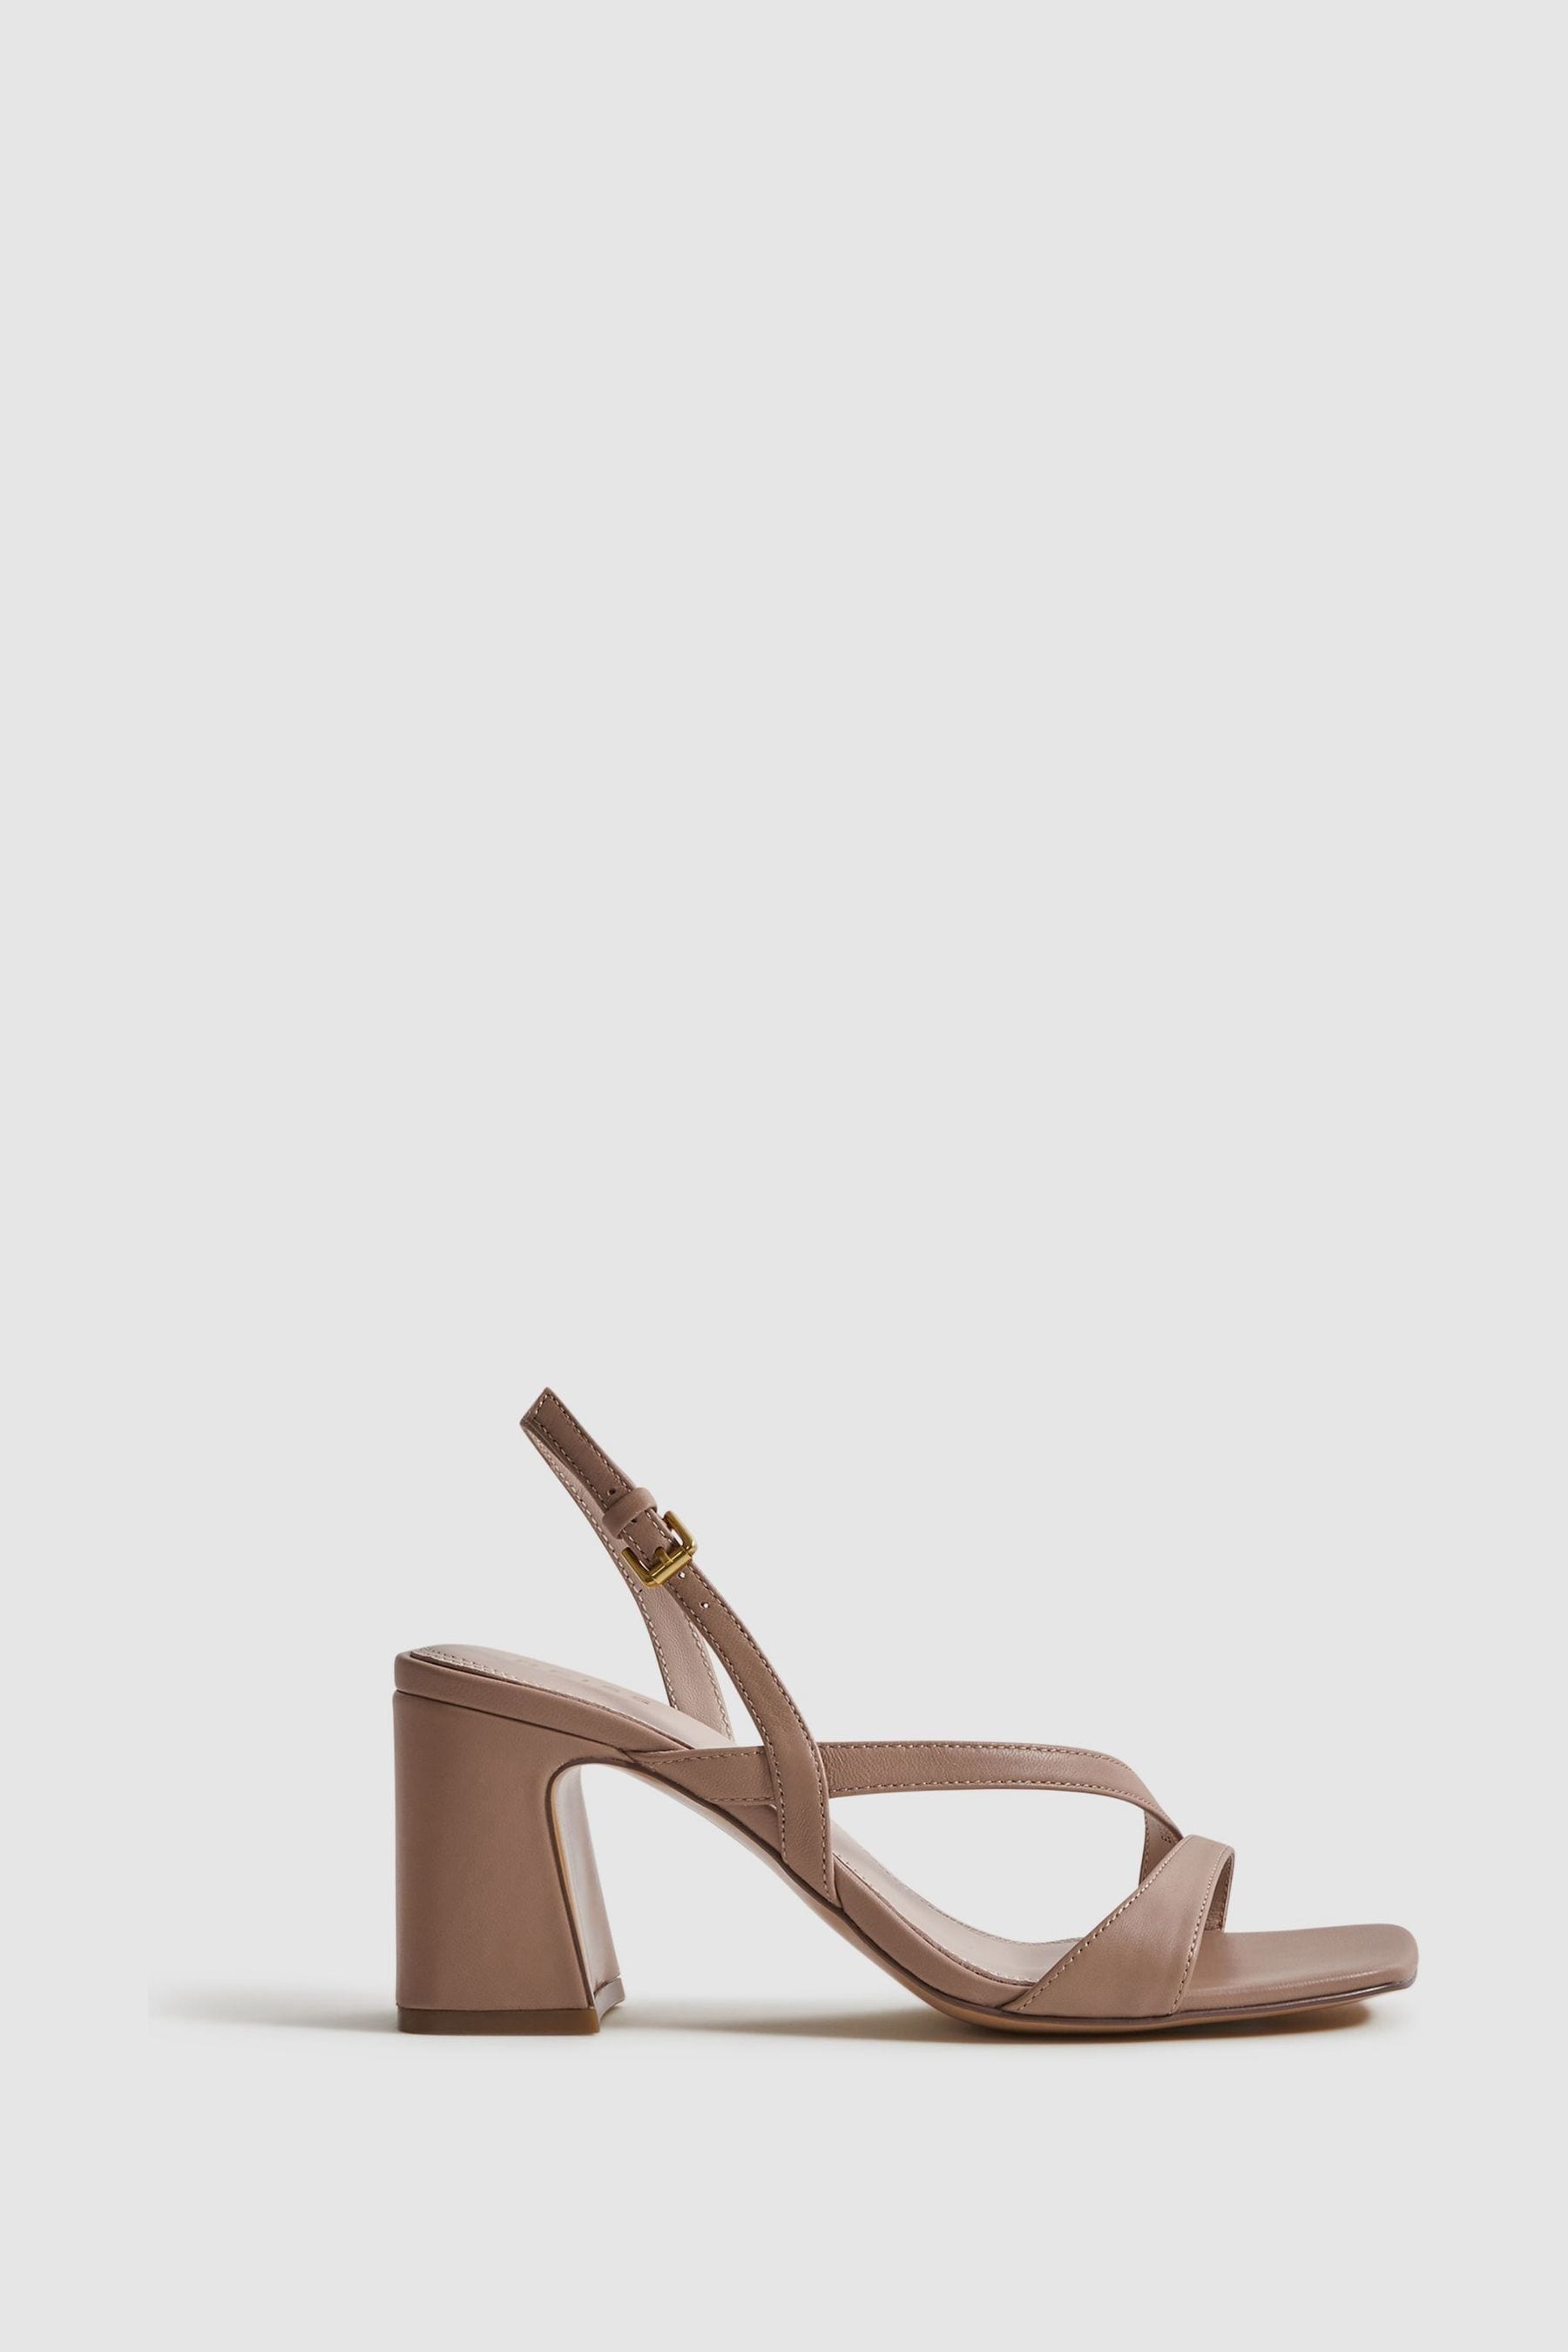 Reiss Alice - Nude Strappy Leather Heeled Sandals, Us 9